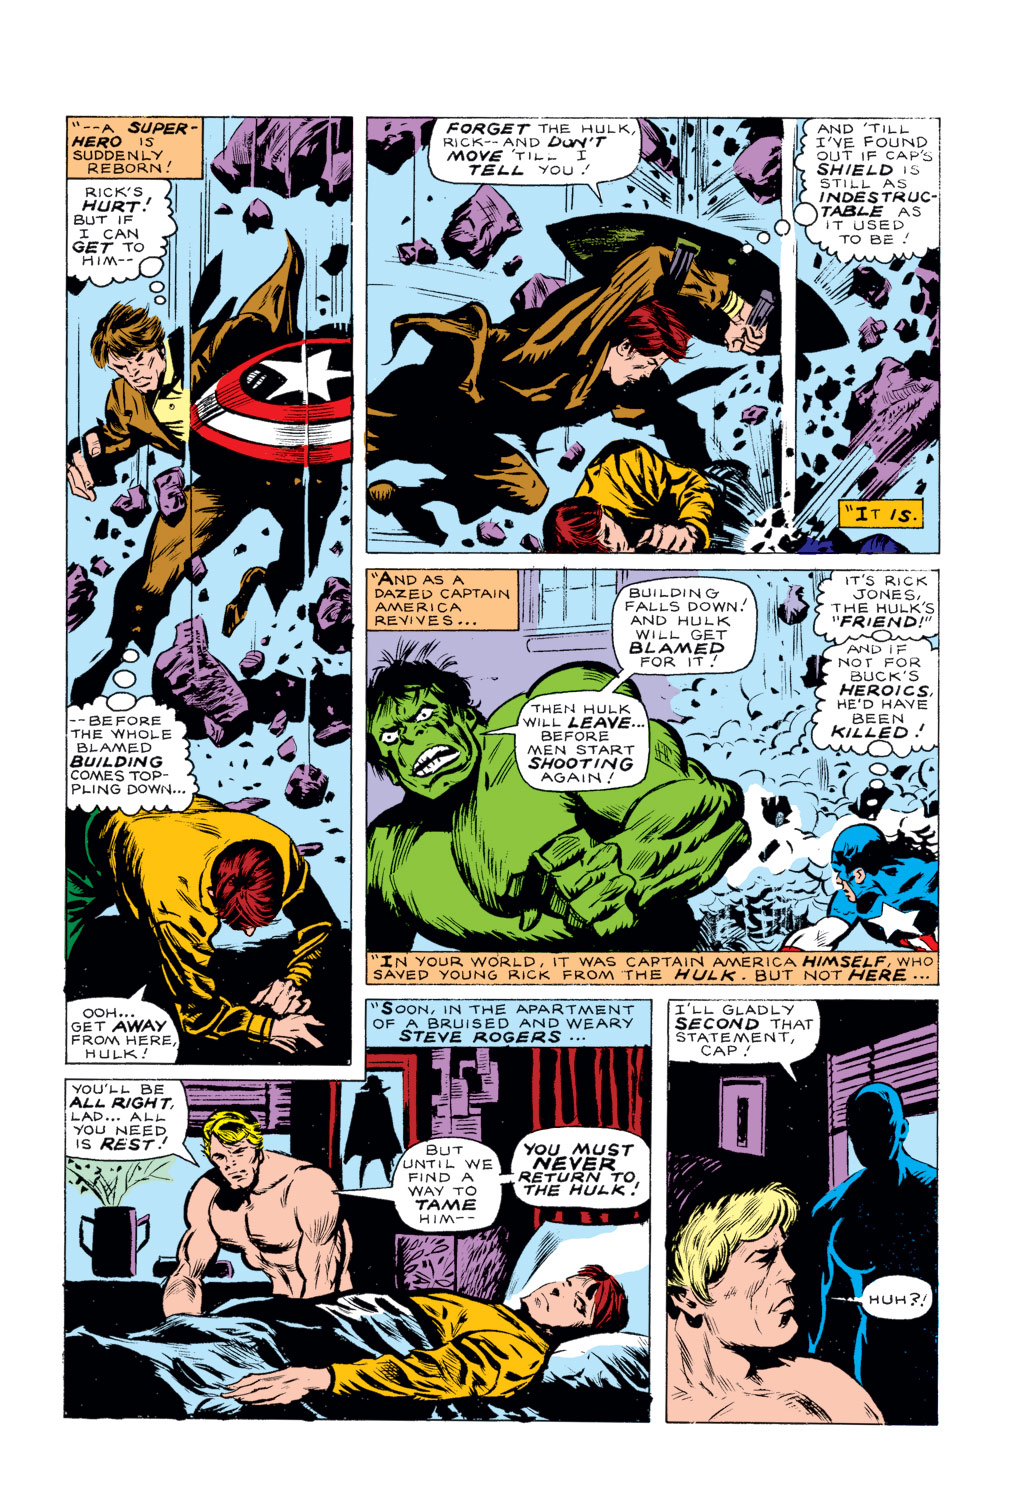 What If? (1977) Issue #5 - Captain America hadn't vanished during World War Two #5 - English 17